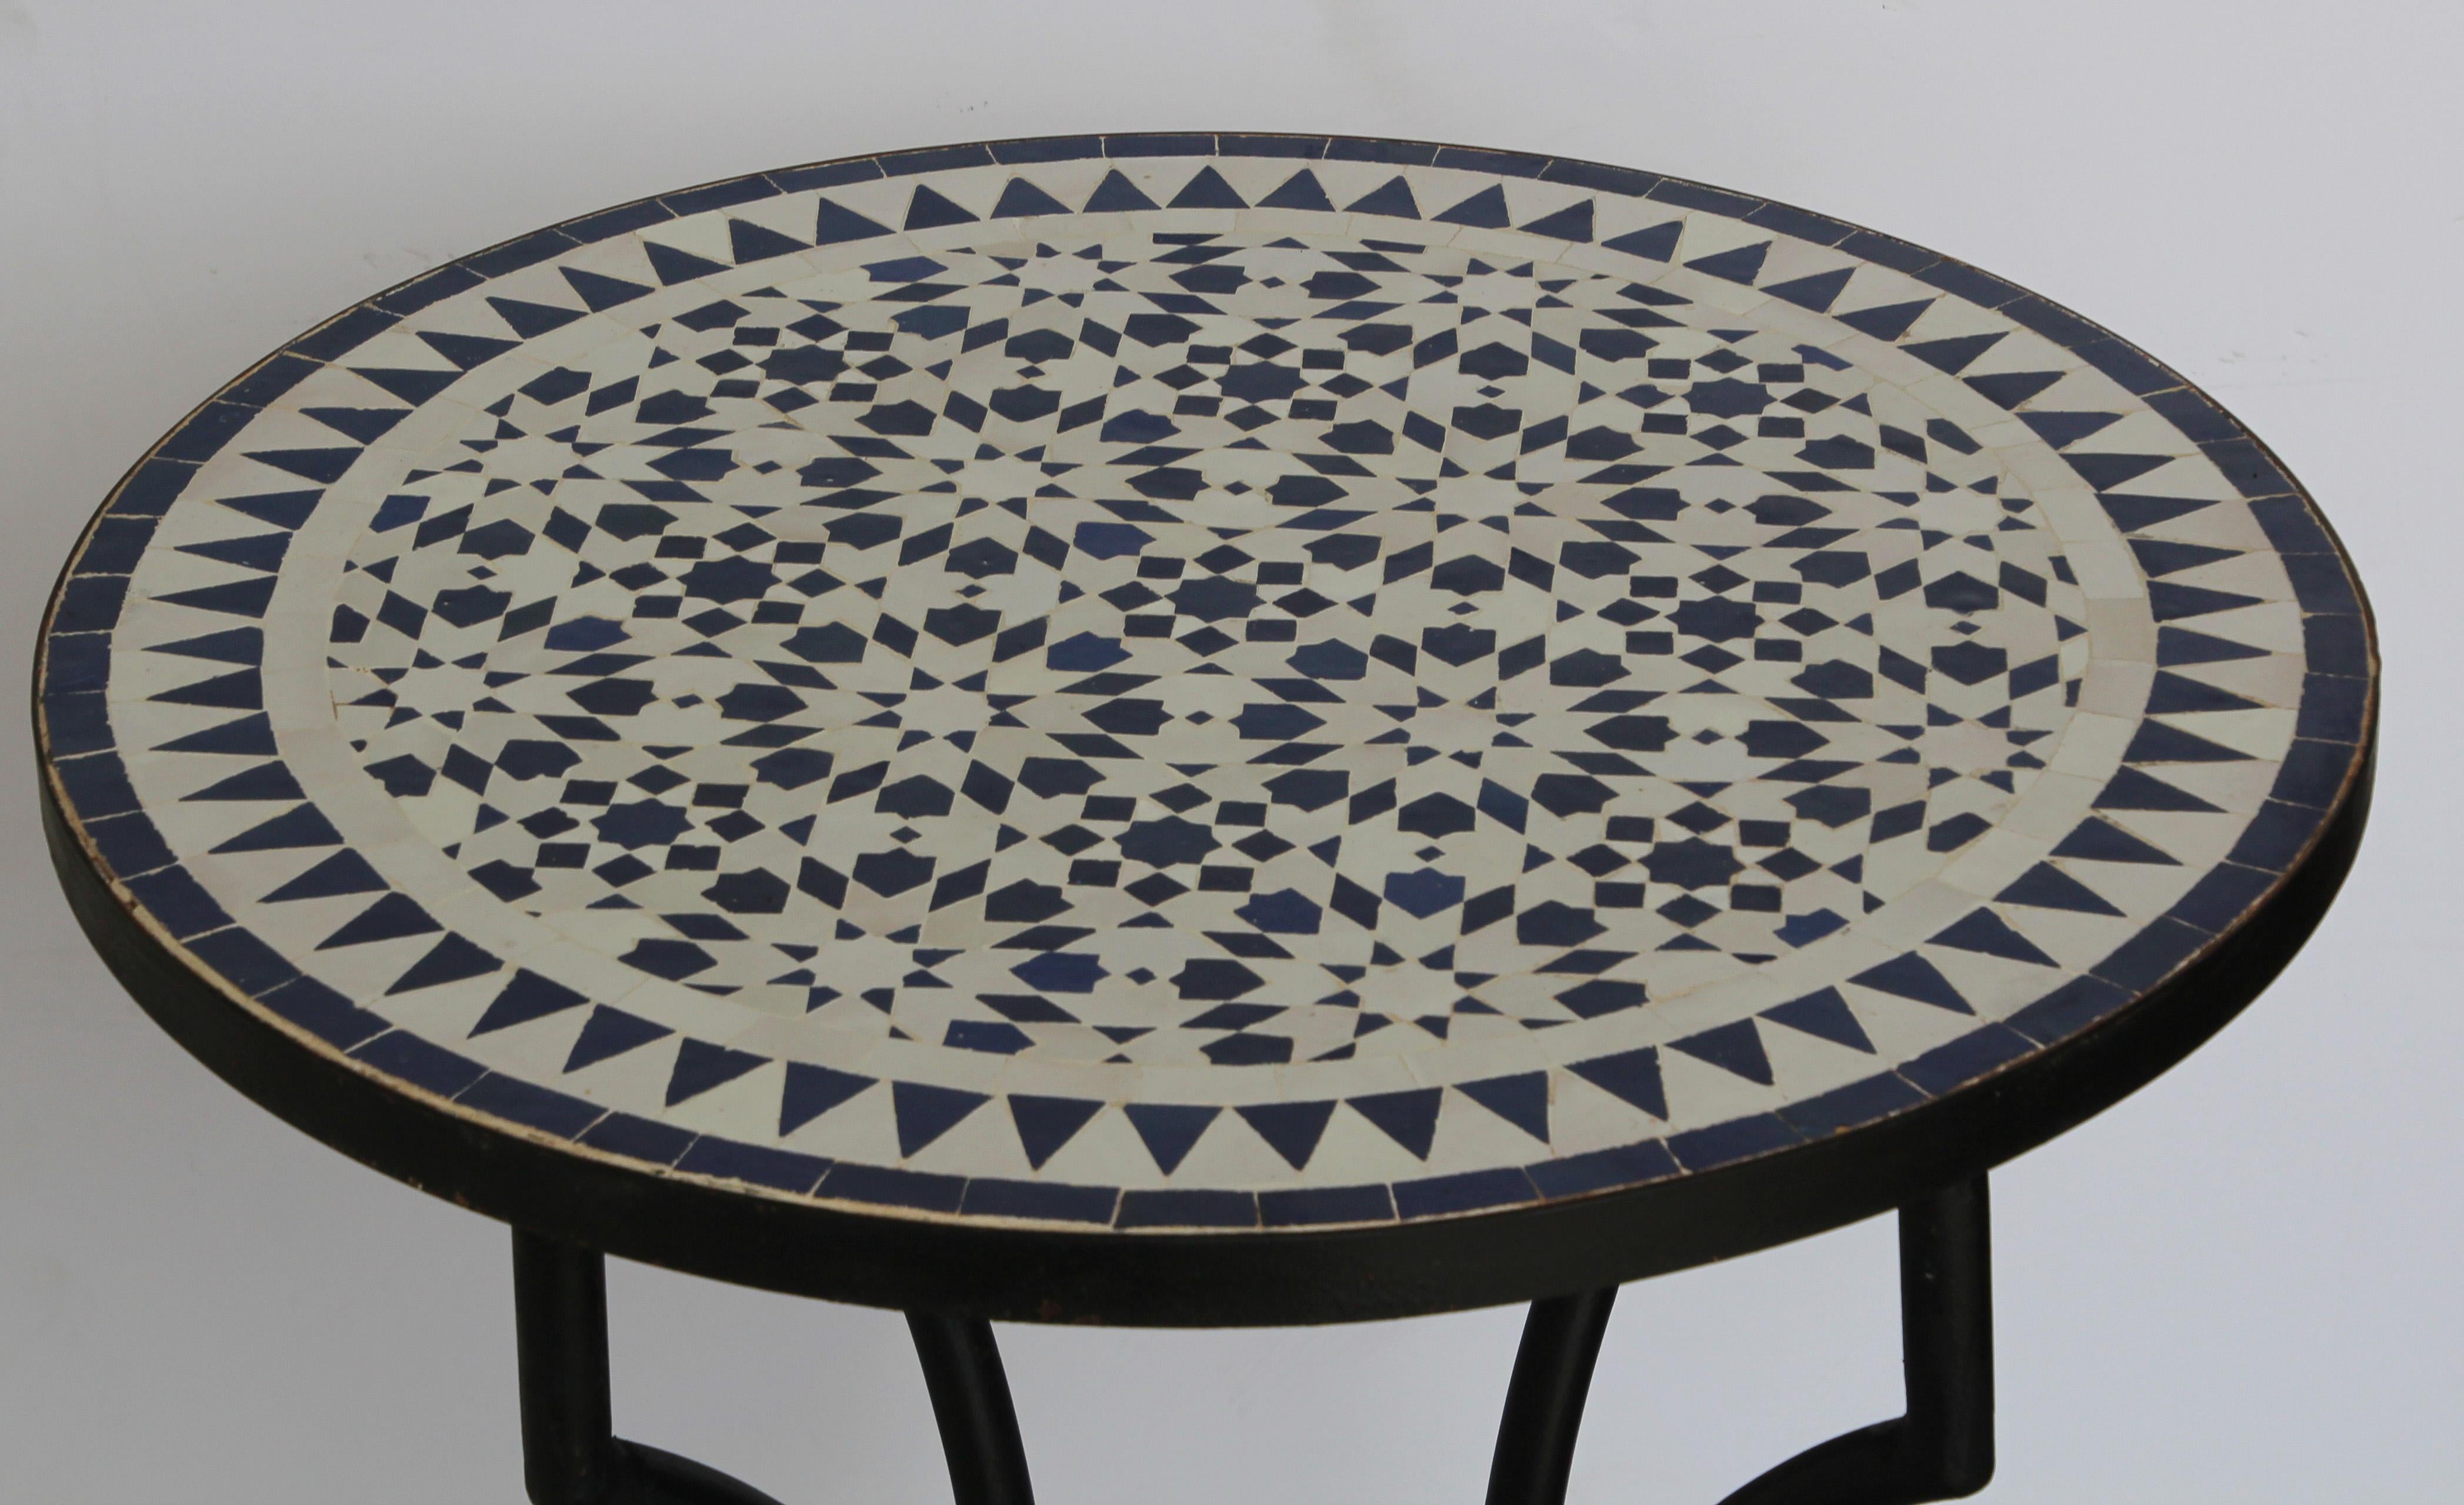 Moroccan mosaic tiles bistro table on iron base.
Handmade by expert artisans in Fez, Morocco using reclaimed old glazed blue and white colors tiles inlaid in concrete and making beautiful geometrical Moorish Fez designs, colors are blue and white,